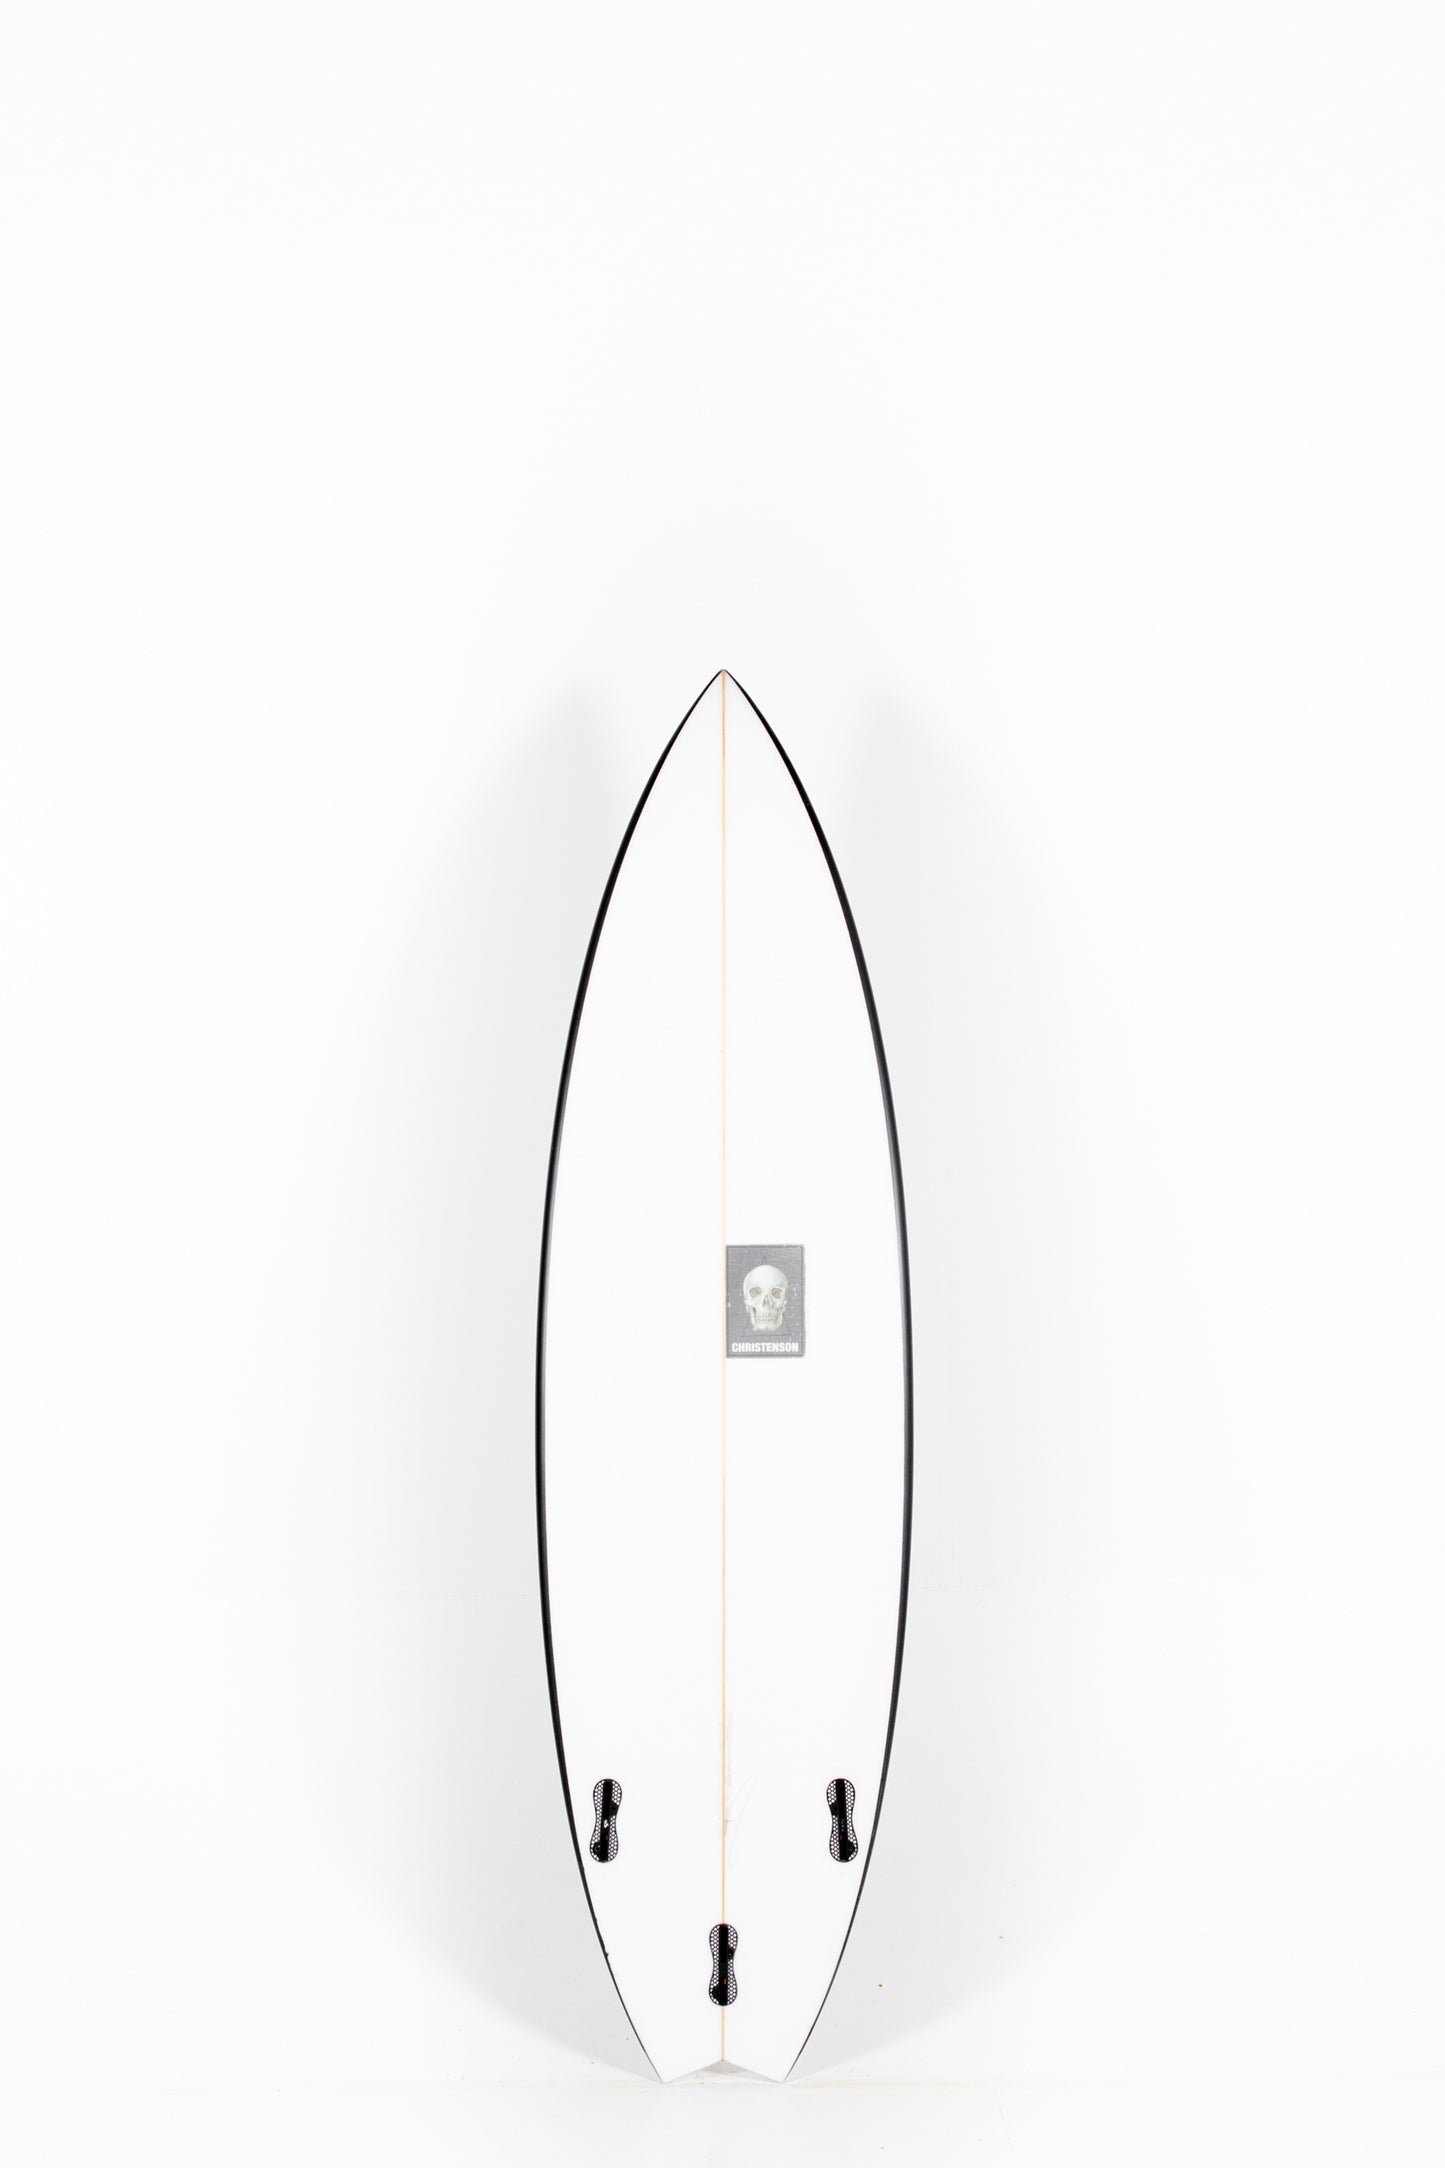 The GERR by Chris Christenson Surfboard at PUKAS SURF SHOP